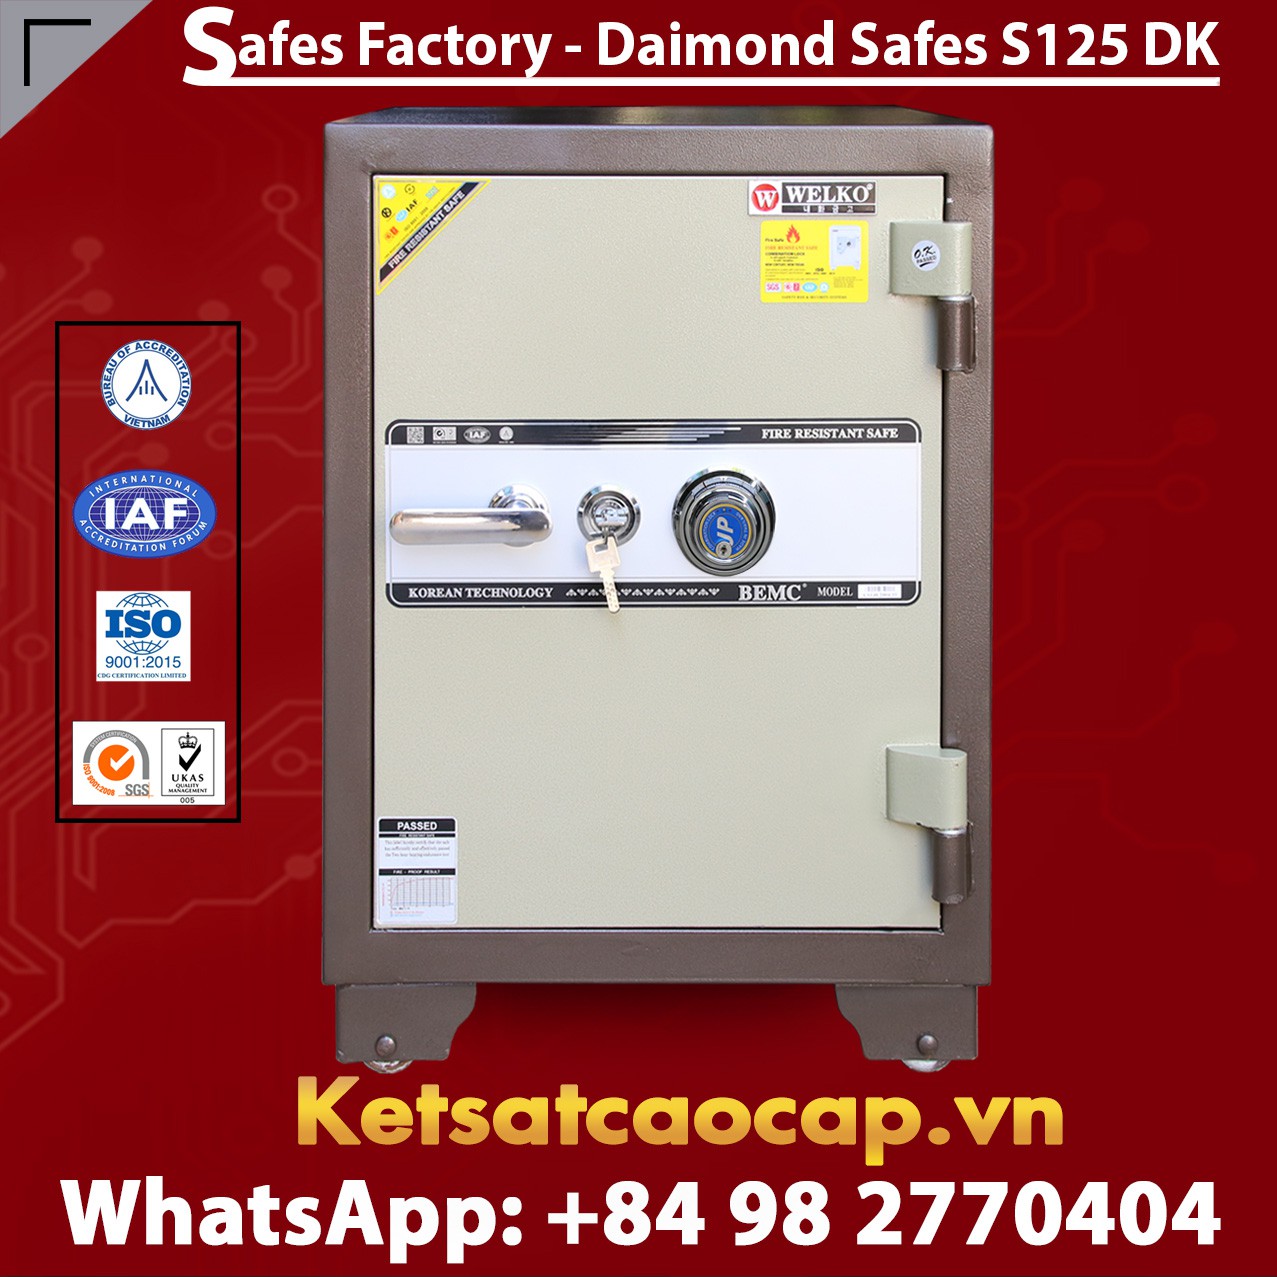 Office Safe Box Suppliers and Exporters giảm giá khủng 50%